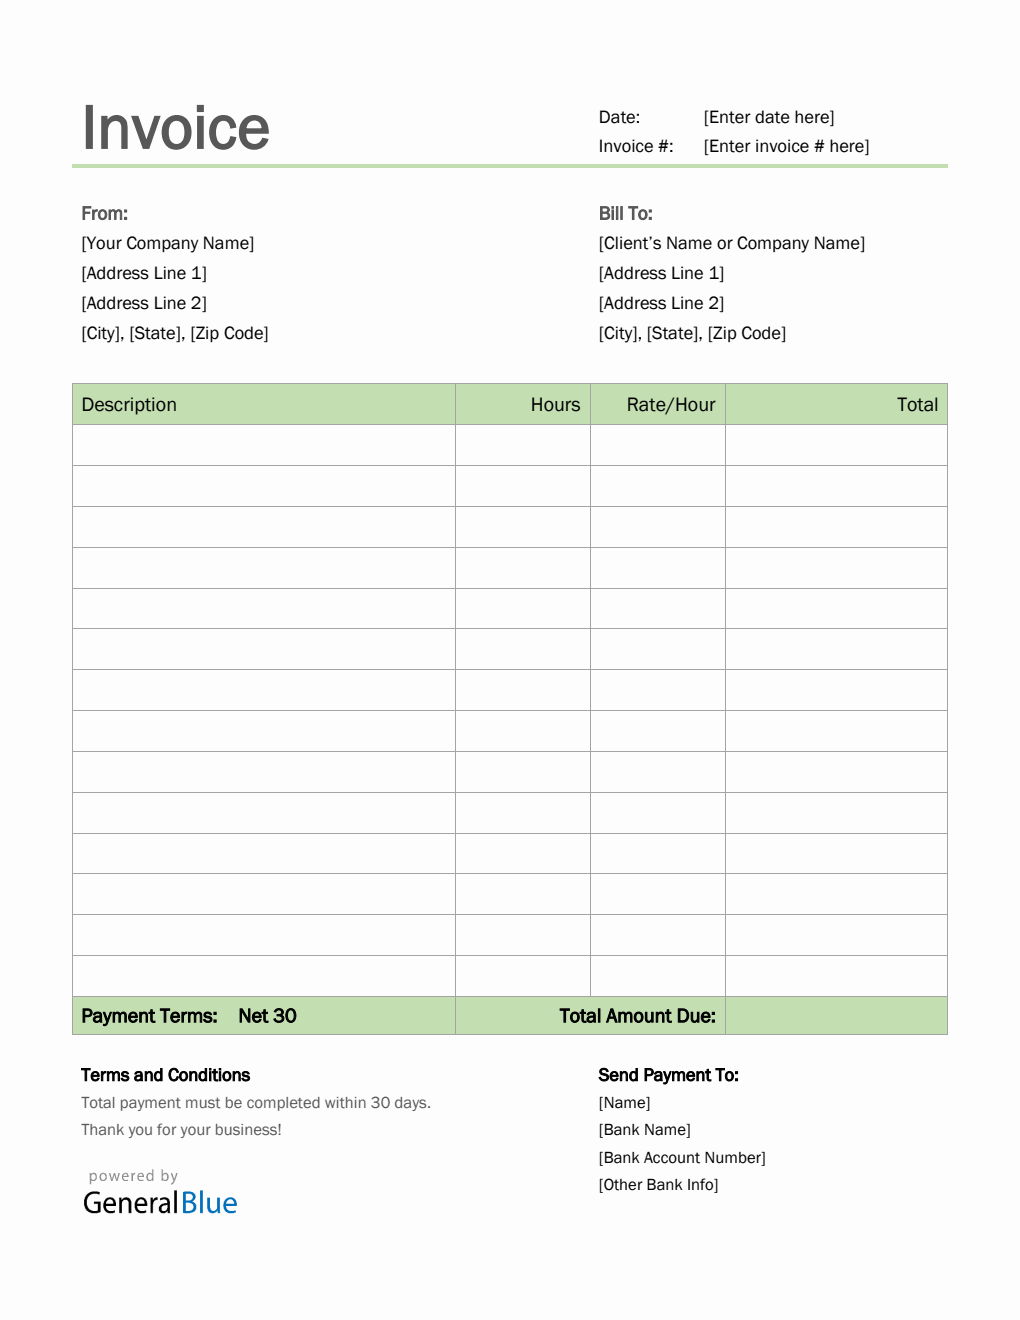 Invoice Template for U.S. Freelancers in Word (Simple)